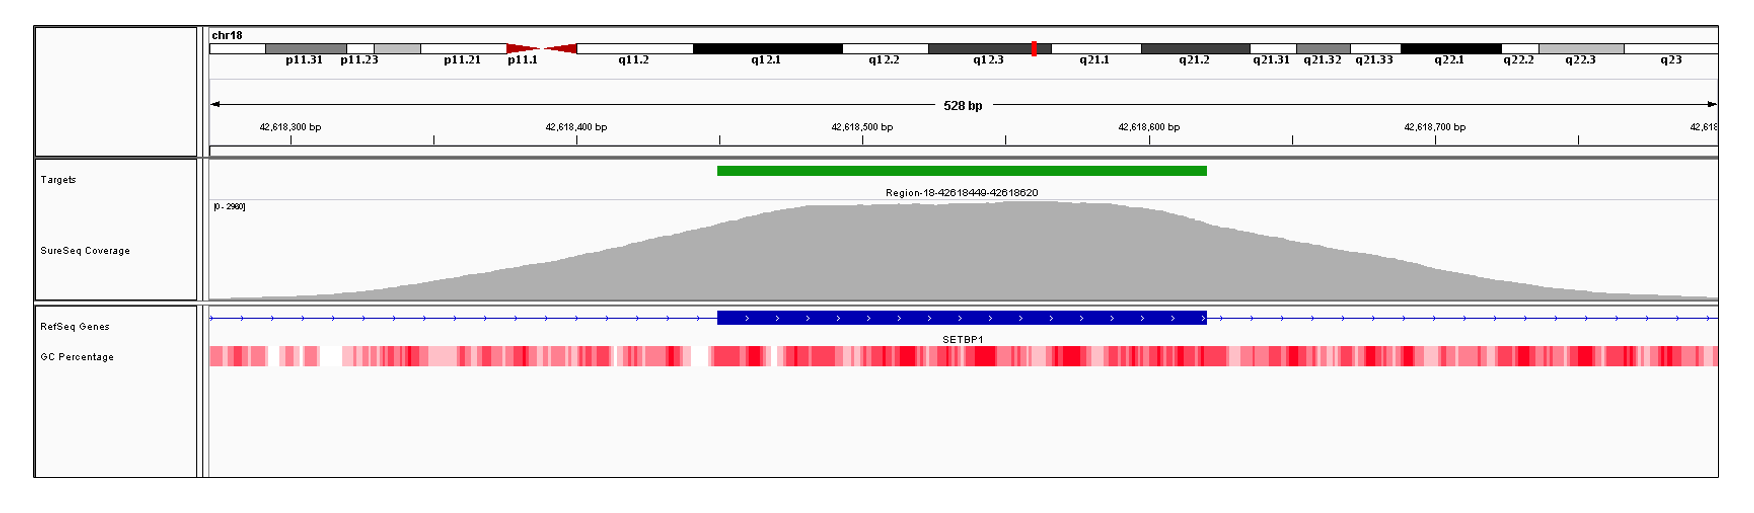 SETBP1 Exon 5 (hg19 chr18:42618450-42618620). Depth of coverage per base (grey). Targeted region (green). Gene coding region as defined by RefSeq (blue). GC percentage (red). Image